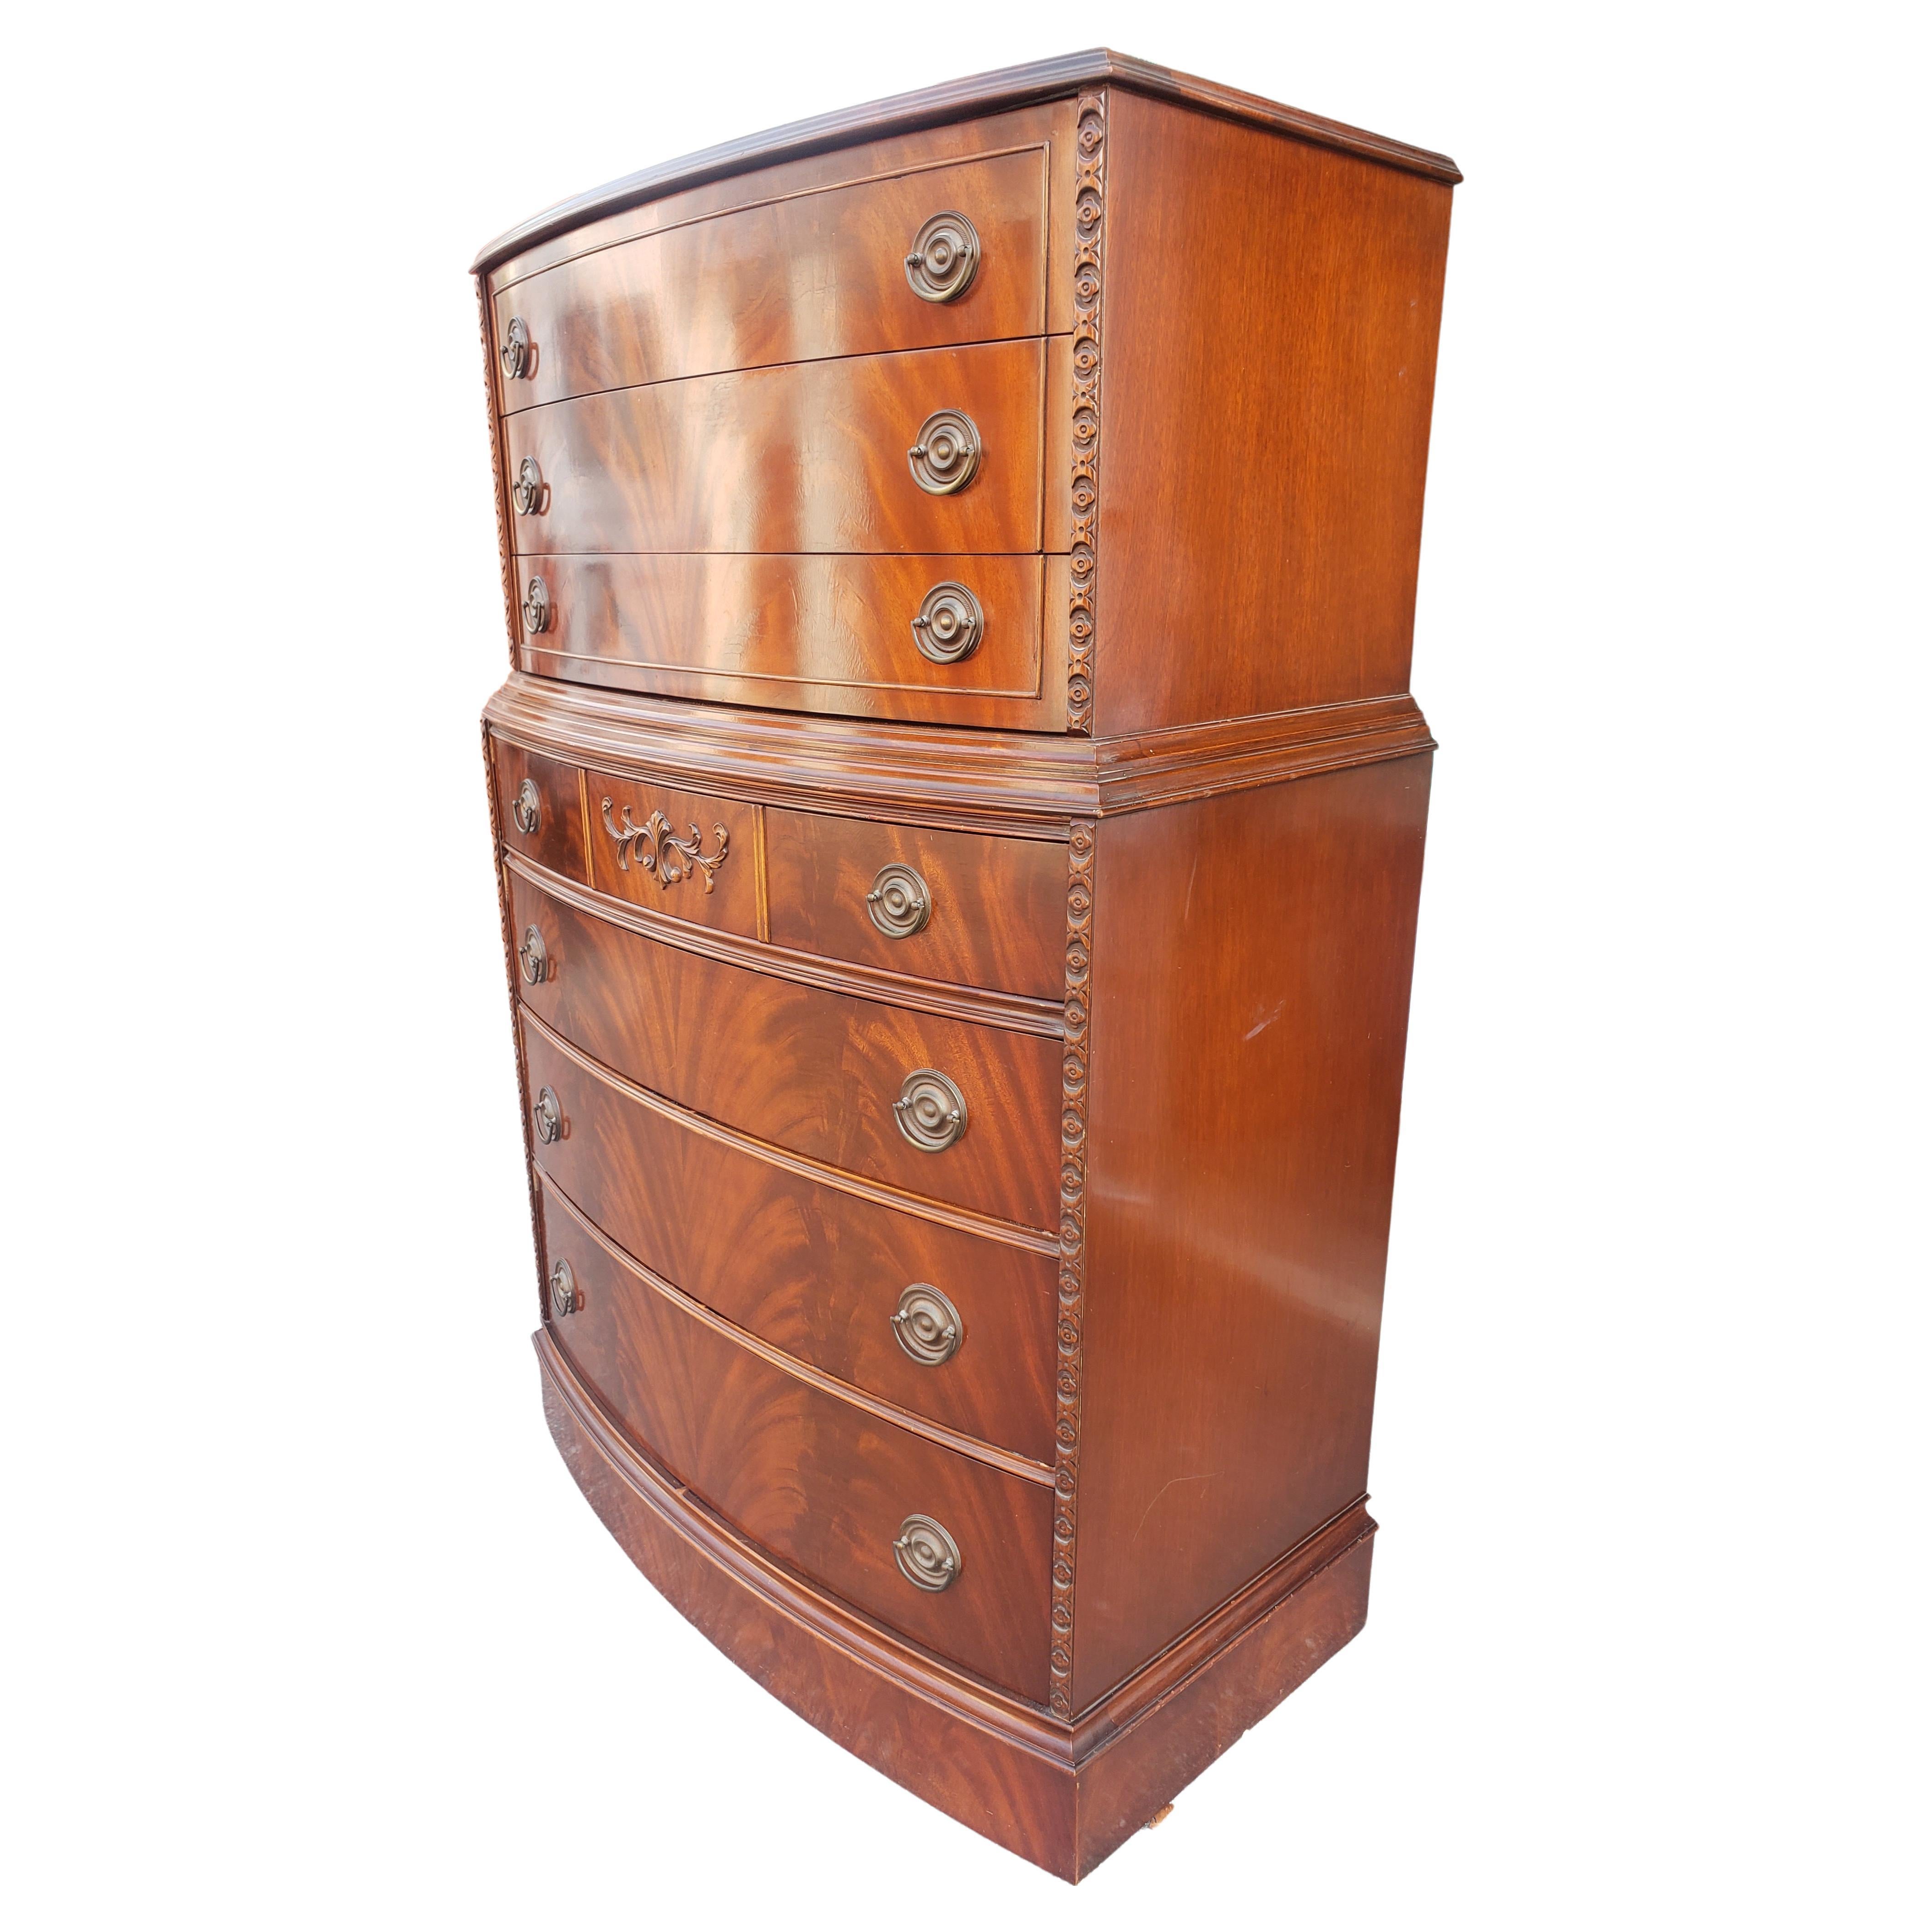 A gorgeous, rare Early 20th Century American Empire Bow Front Flame Mahogany chest on chest of drawers with Beatiful craving decorations and dovetail construction drawers working close to perfection.
Measure 40 in width, 21